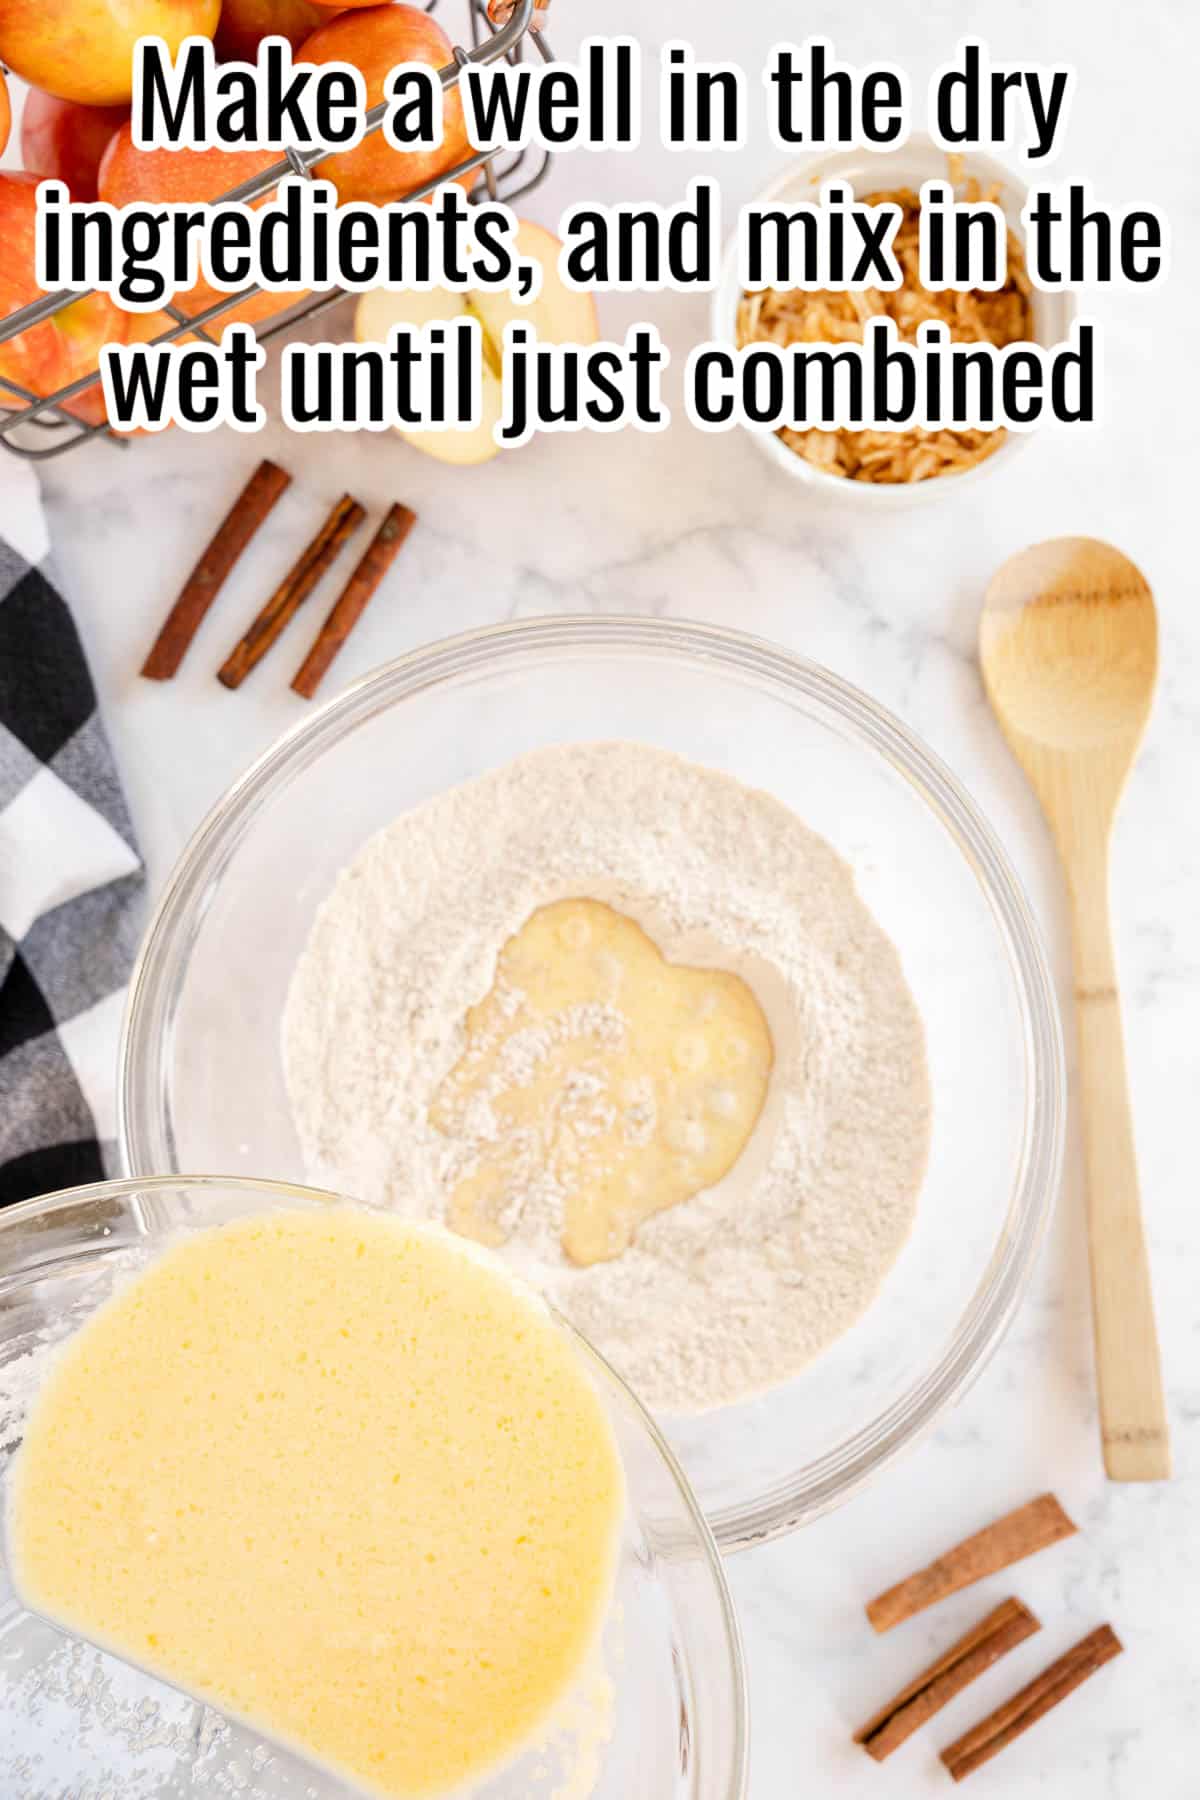 combining the wet and dry ingredients - process image with instructions overlaid in text.